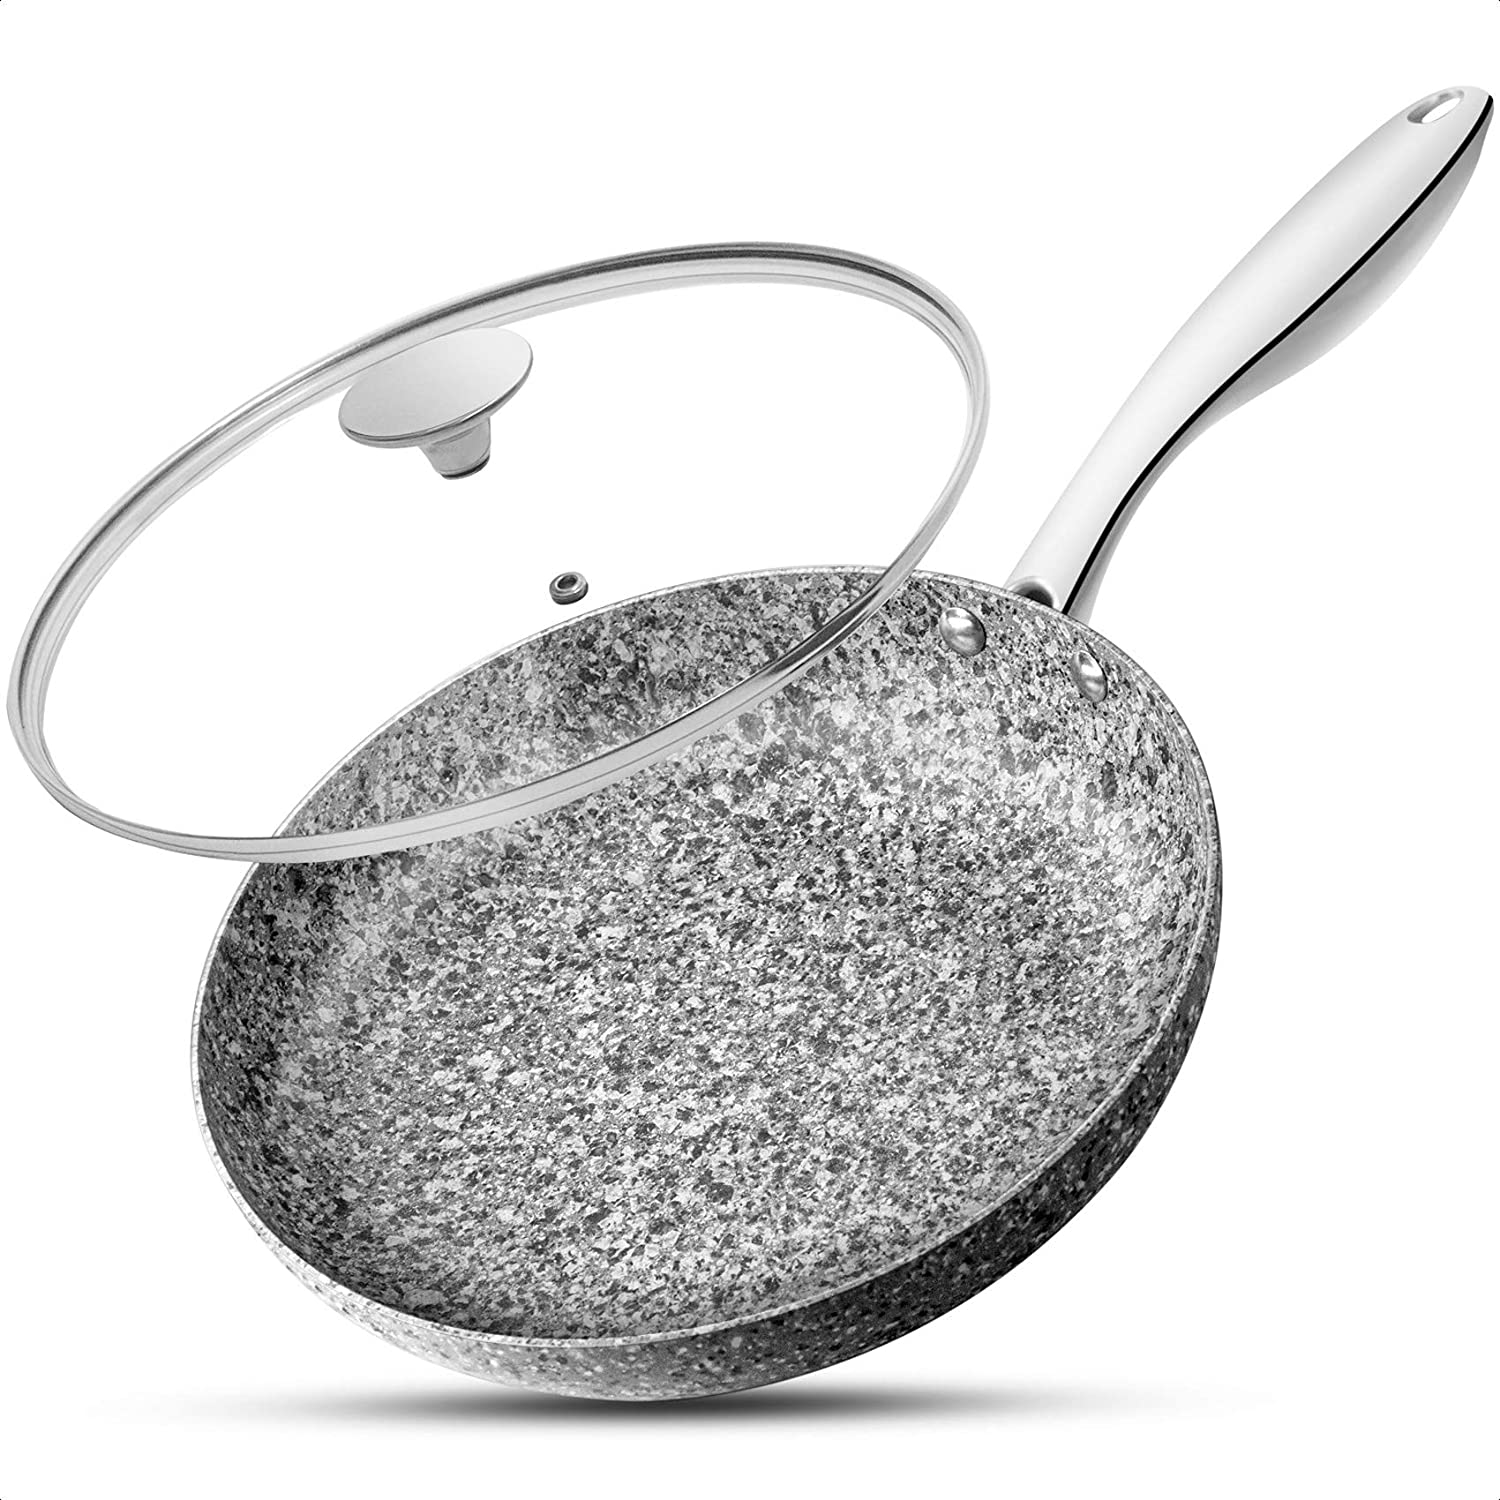 Cook N Home 02668 Ultra Granite Nonstick Skillet Fry Pan 12 Inches Black/White